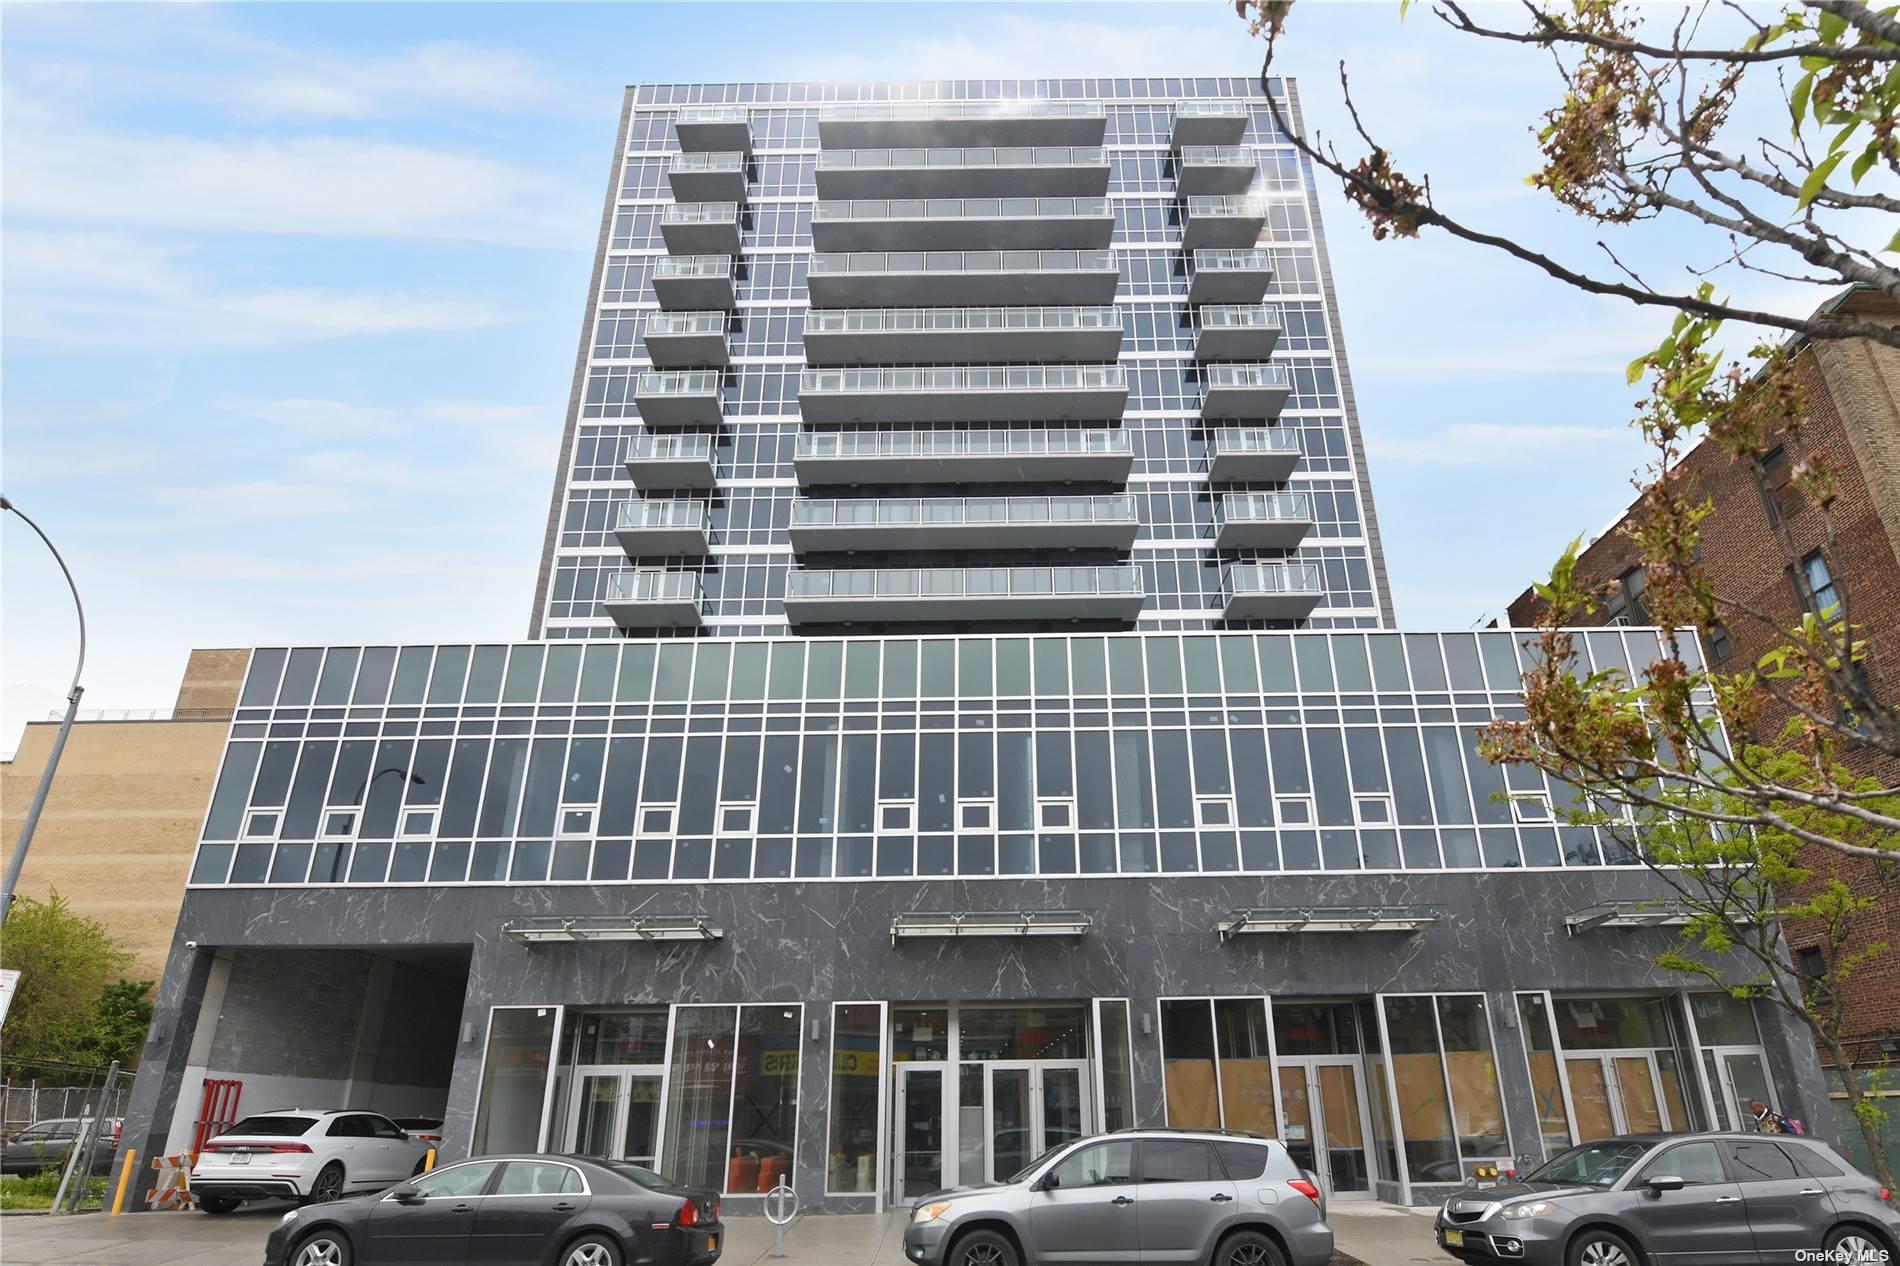 41-62 Bowne Street #12B in Queens, Flushing, NY 11355